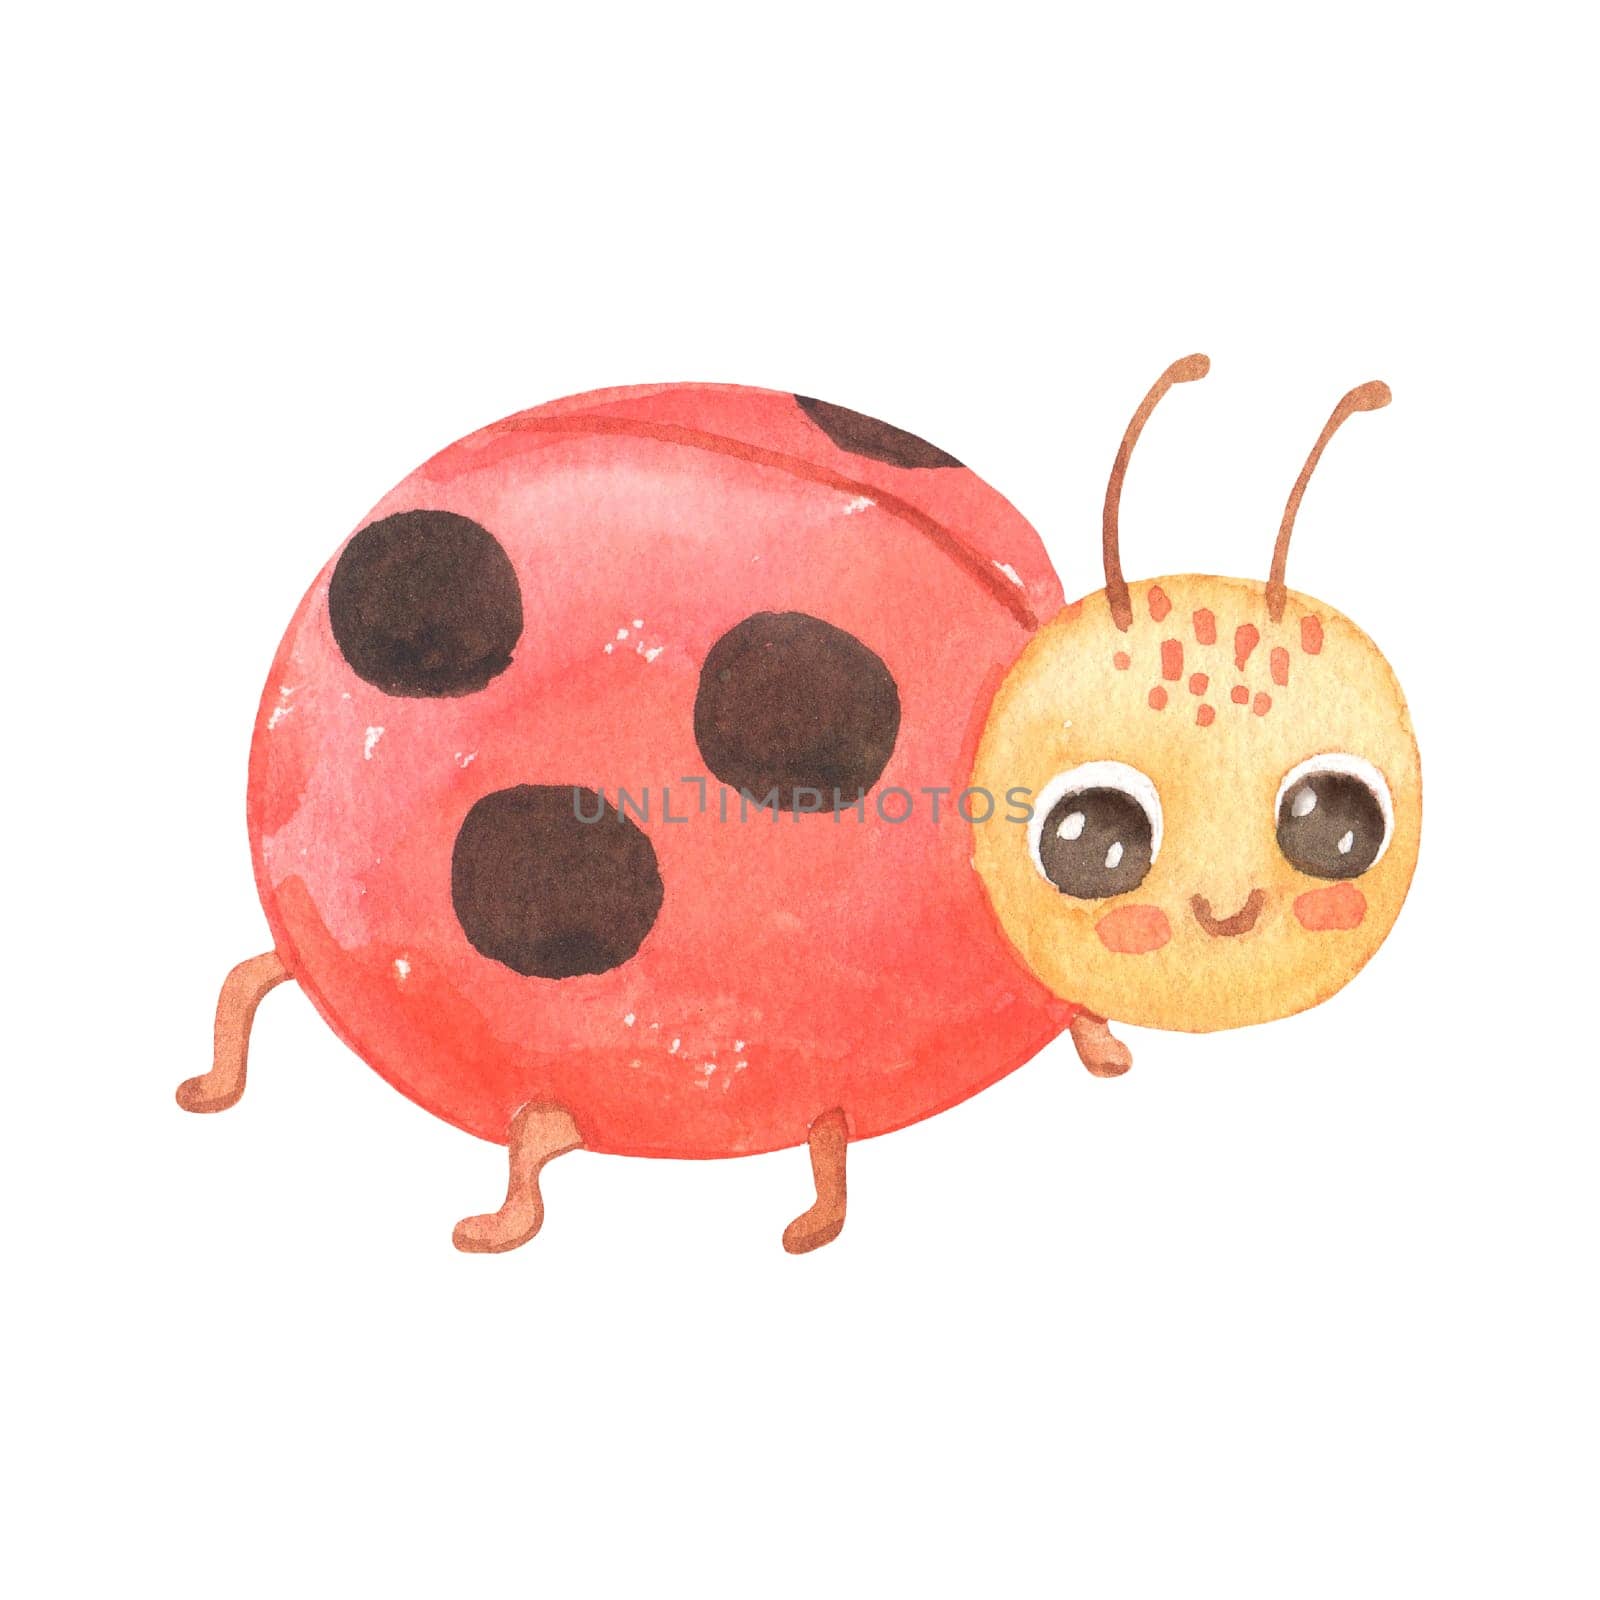 Cute smiling ladybug isolated on white. Funny insect for children. Watercolor cartoon illustration by ElenaPlatova